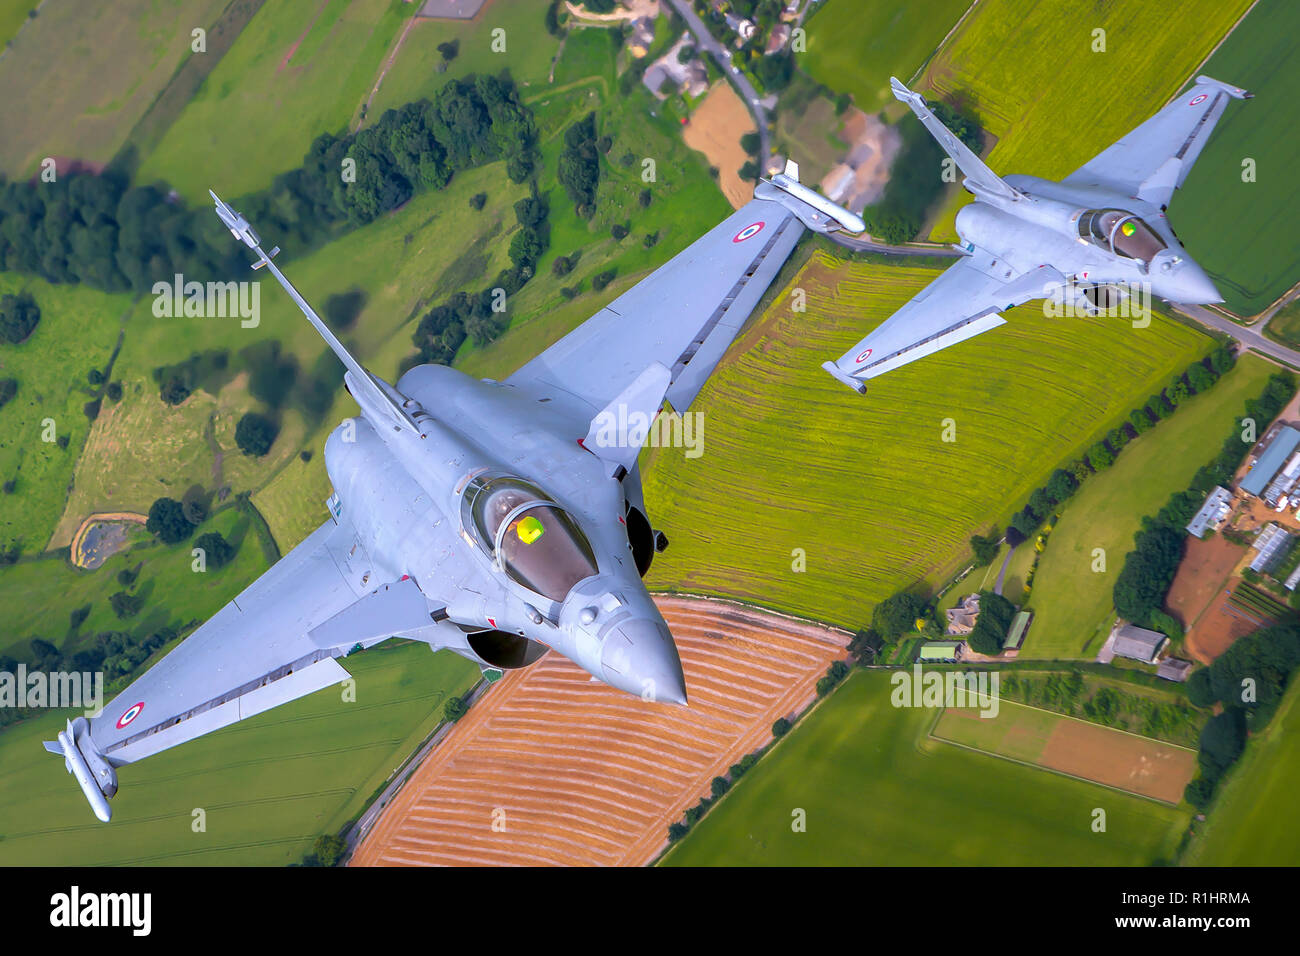 Dassault Rafale is a French twin-engine, canard delta wing, multirole fighter aircraft designed and built by Dassault Aviation. Equipped with a wide r Stock Photo